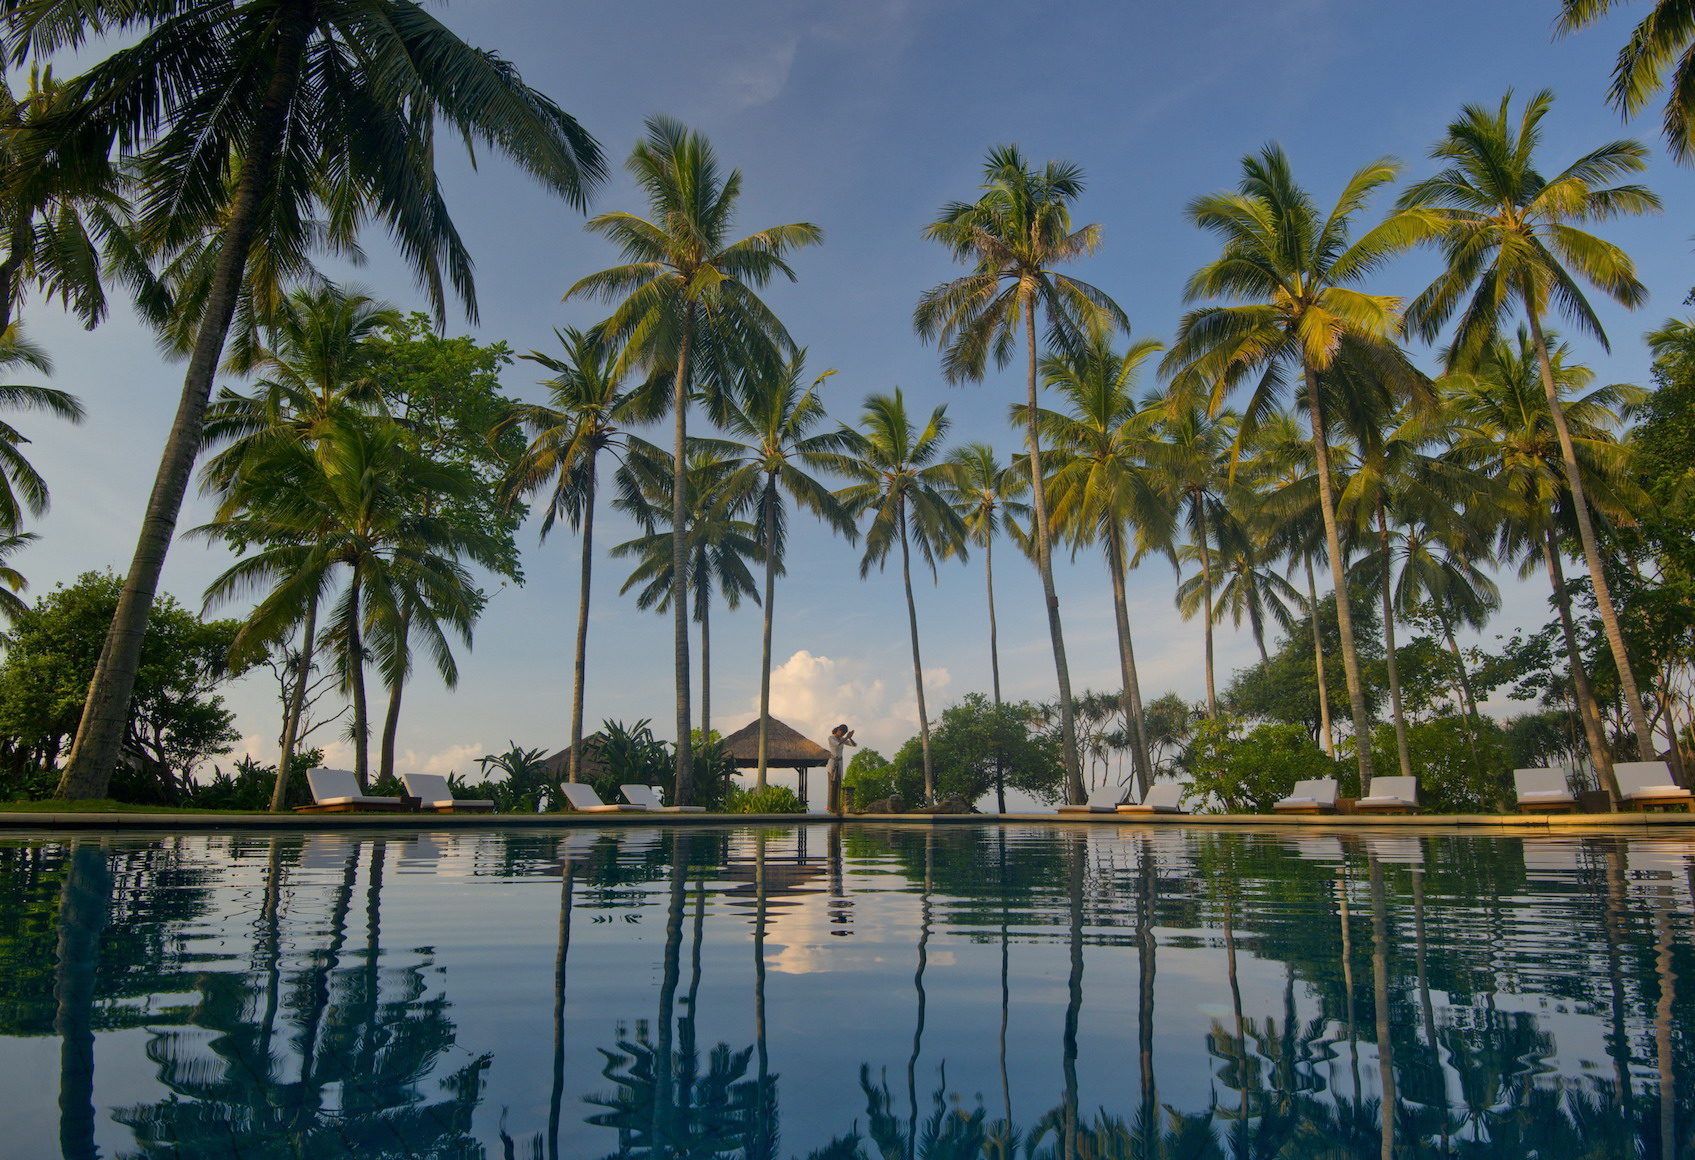 Checking in: Alila Manggis Bali, where coconut trees stand tall and worries are small